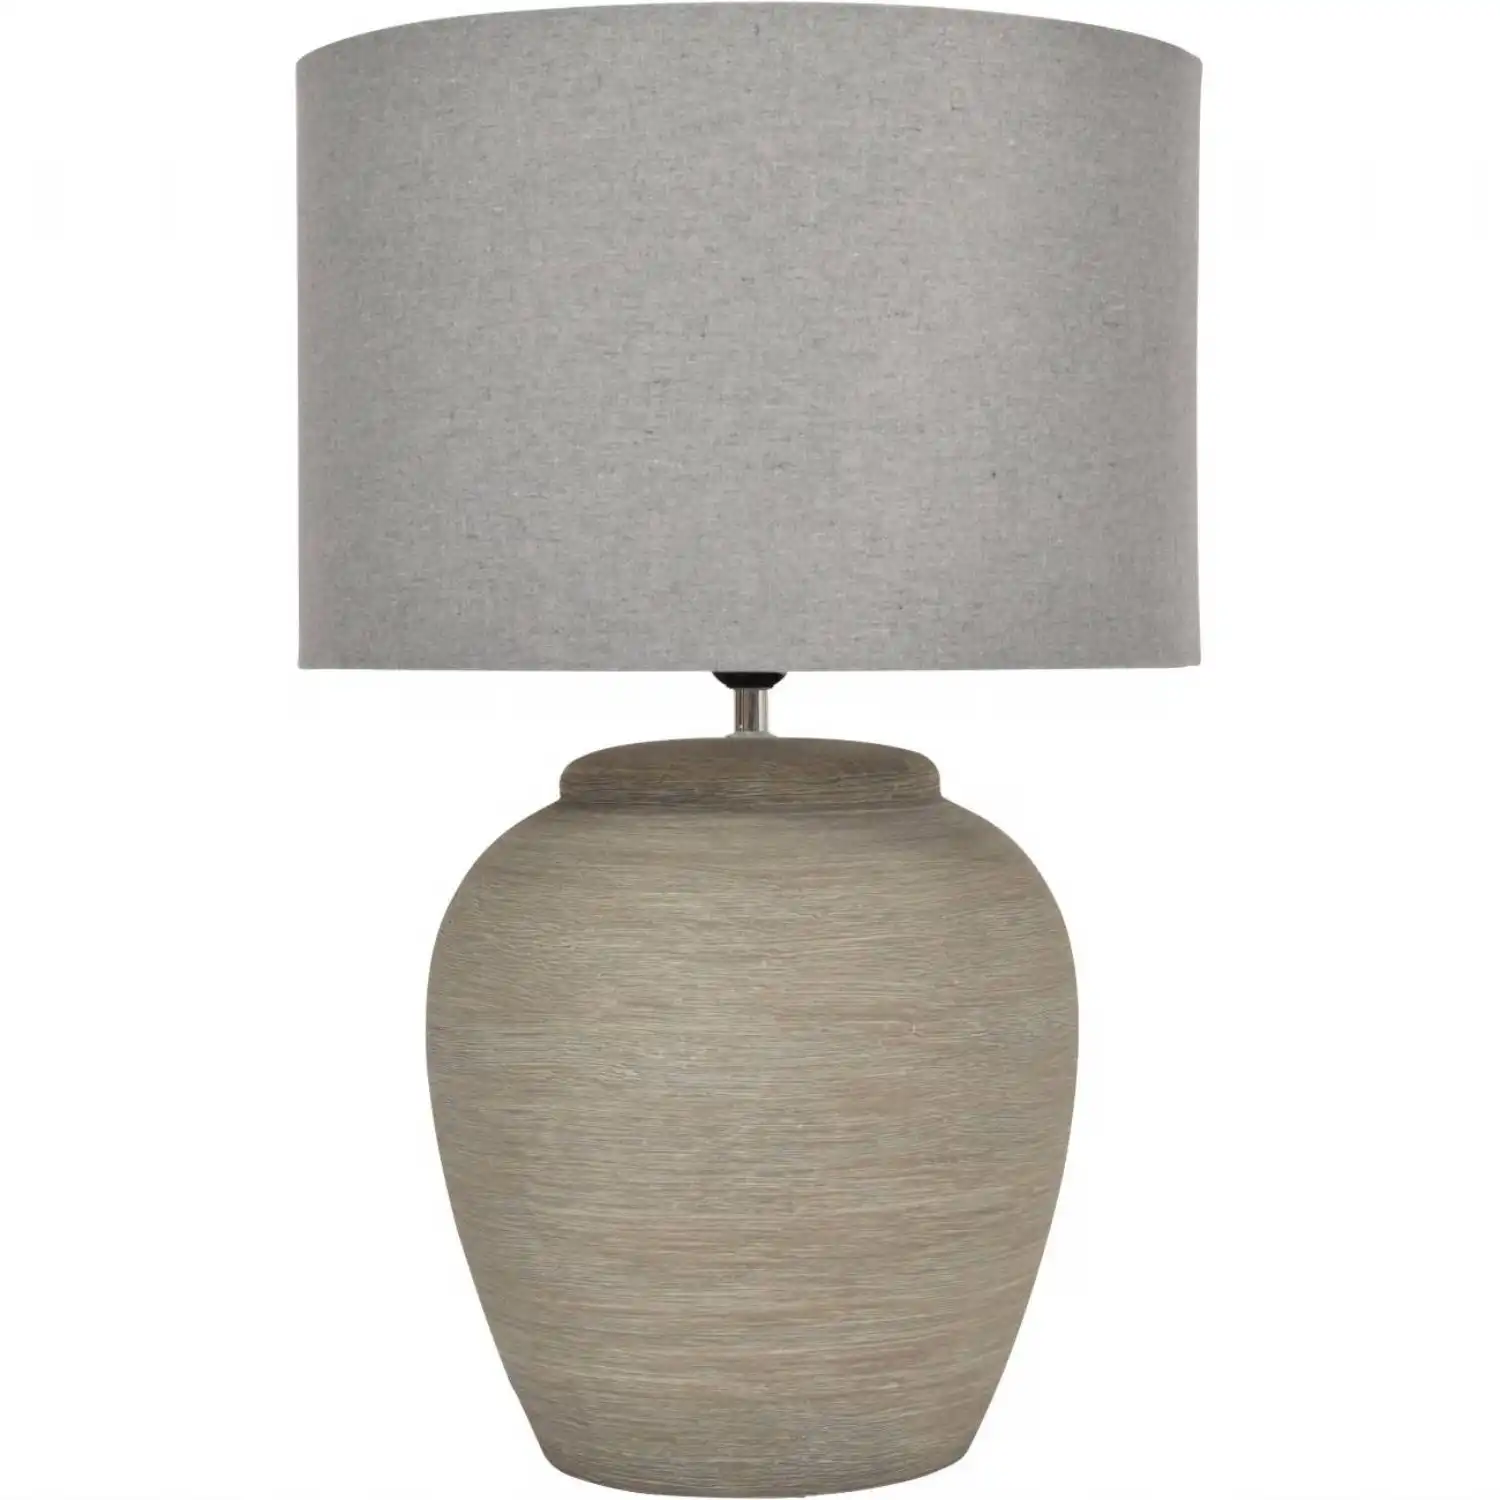 Etched Grey Small Ceramic Lamp with Shade E27 60W